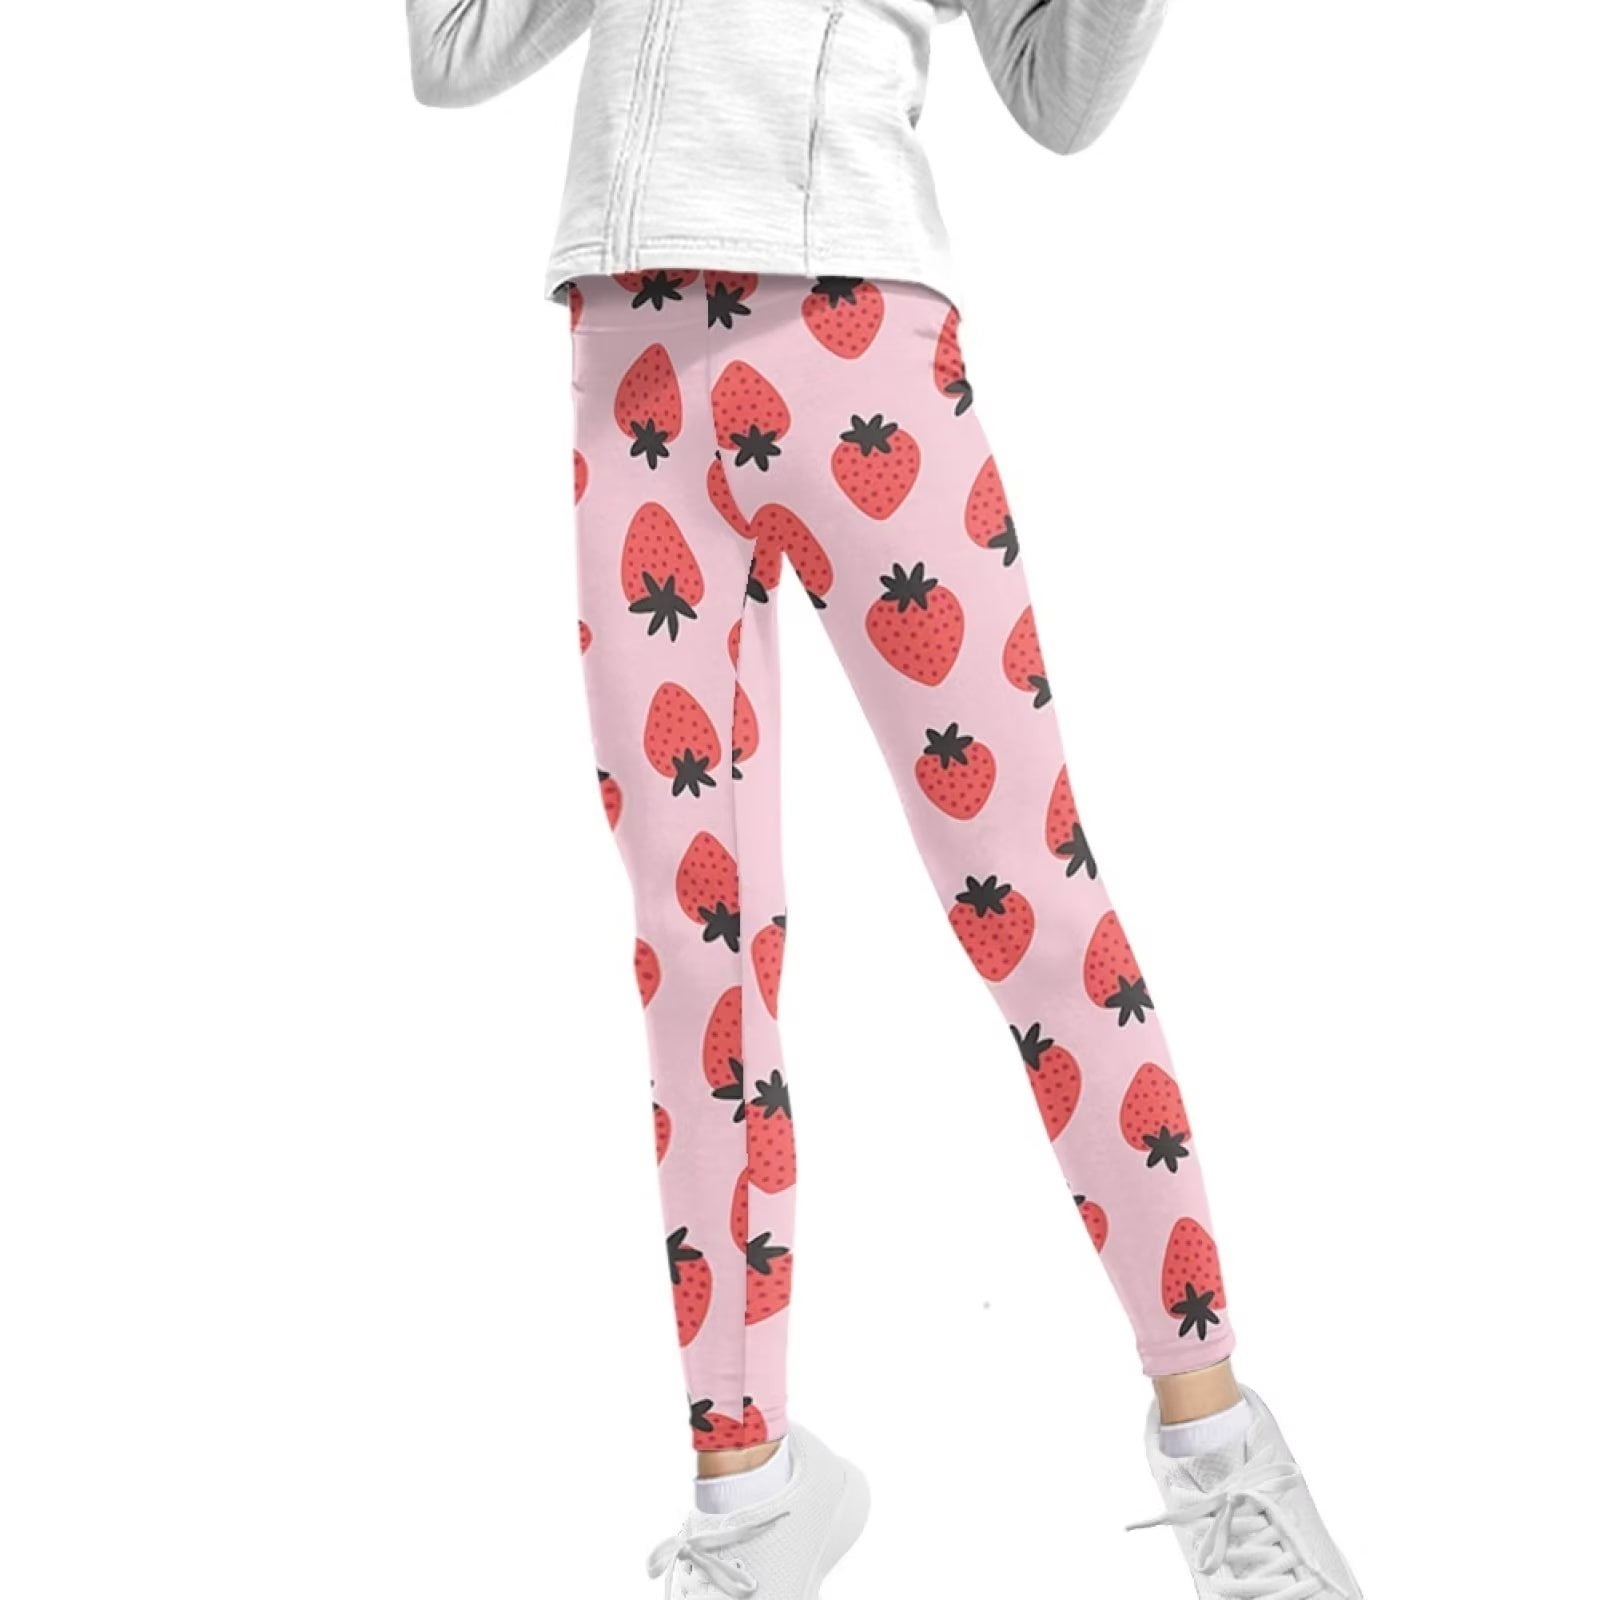 FKELYI Strawberry Print Girls Leggings Size 12-13 Years Durable